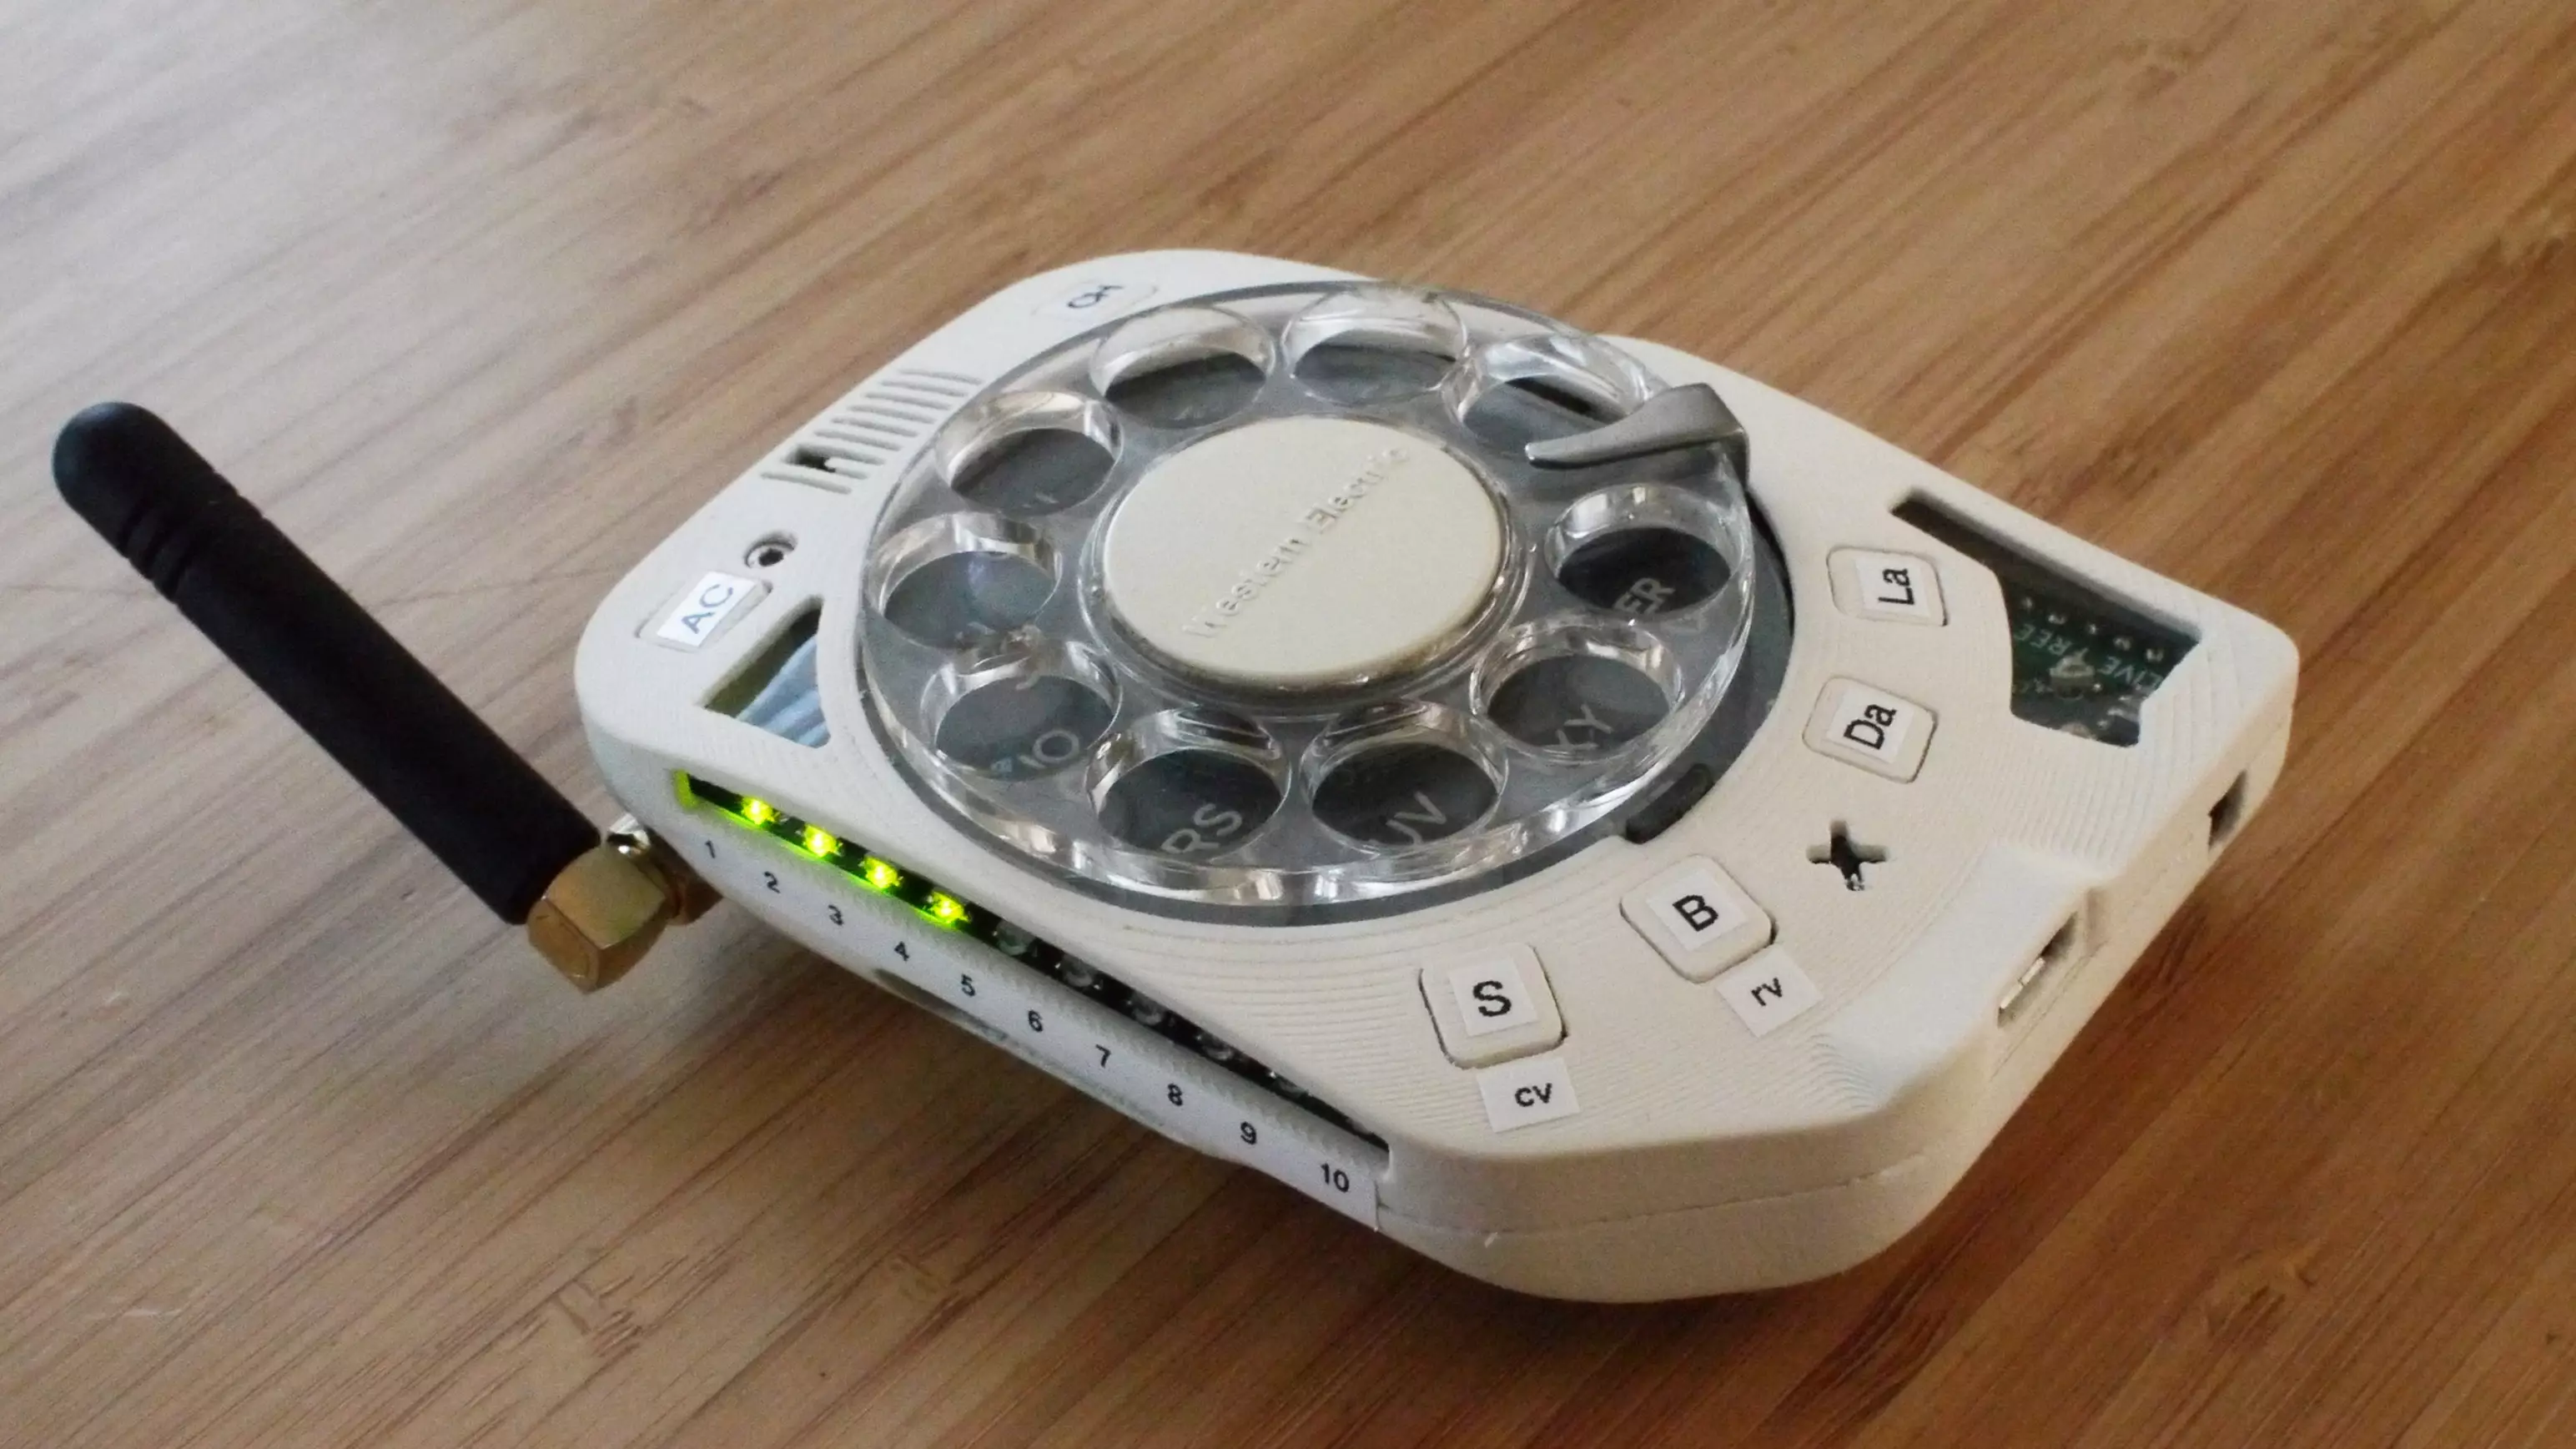 Woman Creates Fully-Functioning Distraction-Free Mobile Phone With Rotary Dial